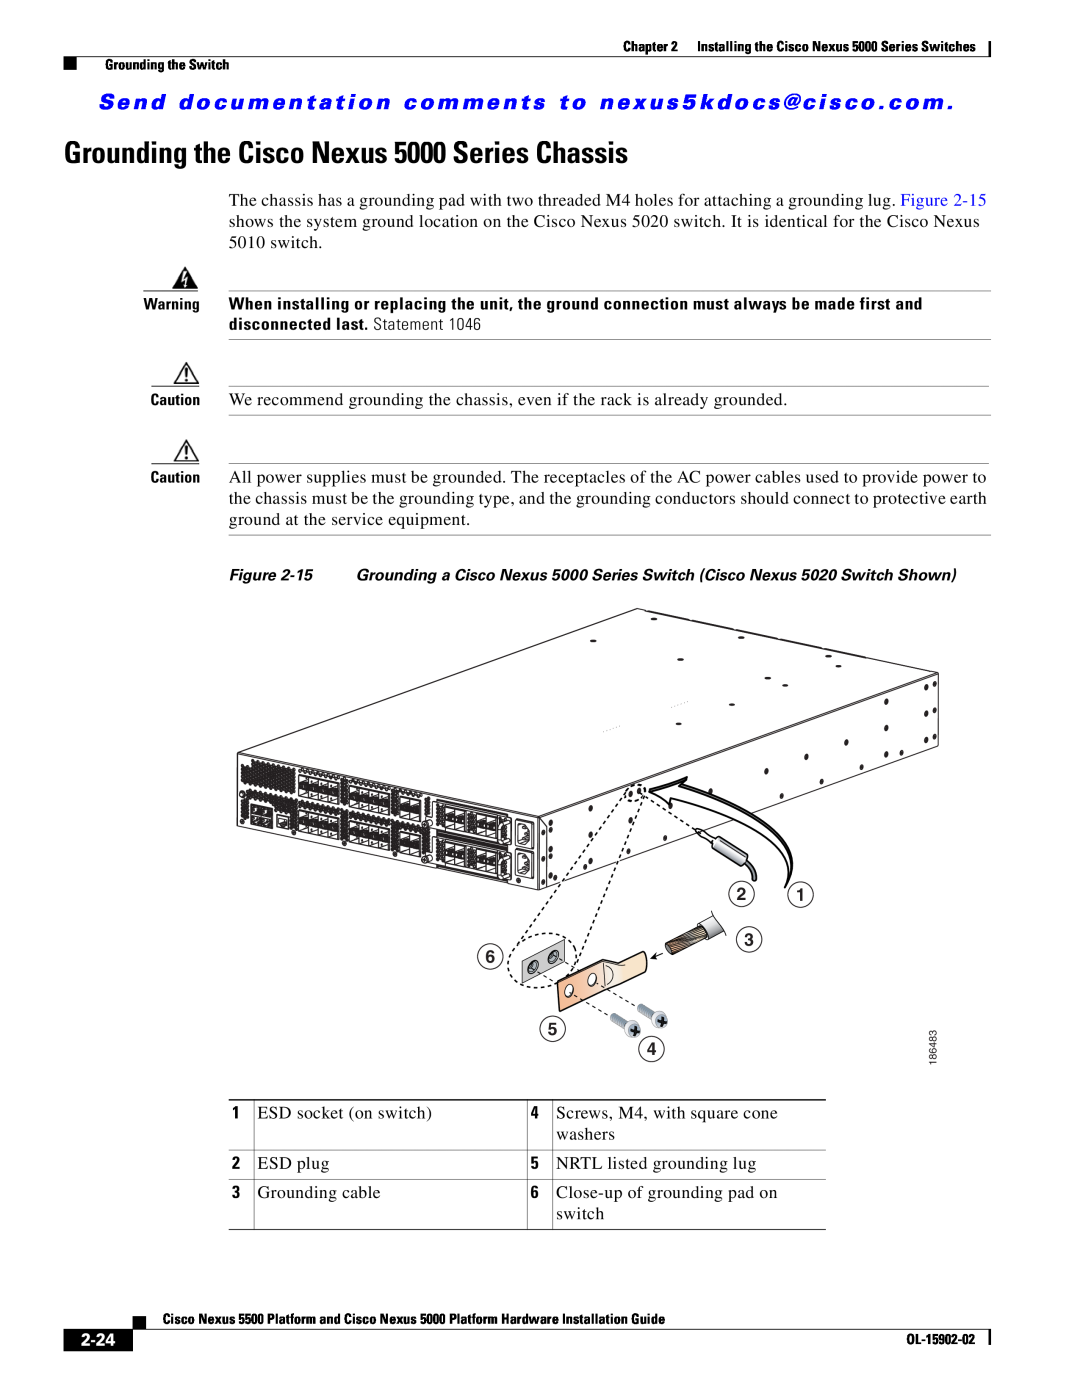 Cisco Systems manual Grounding the Cisco Nexus 5000 Series Chassis, 2-24 